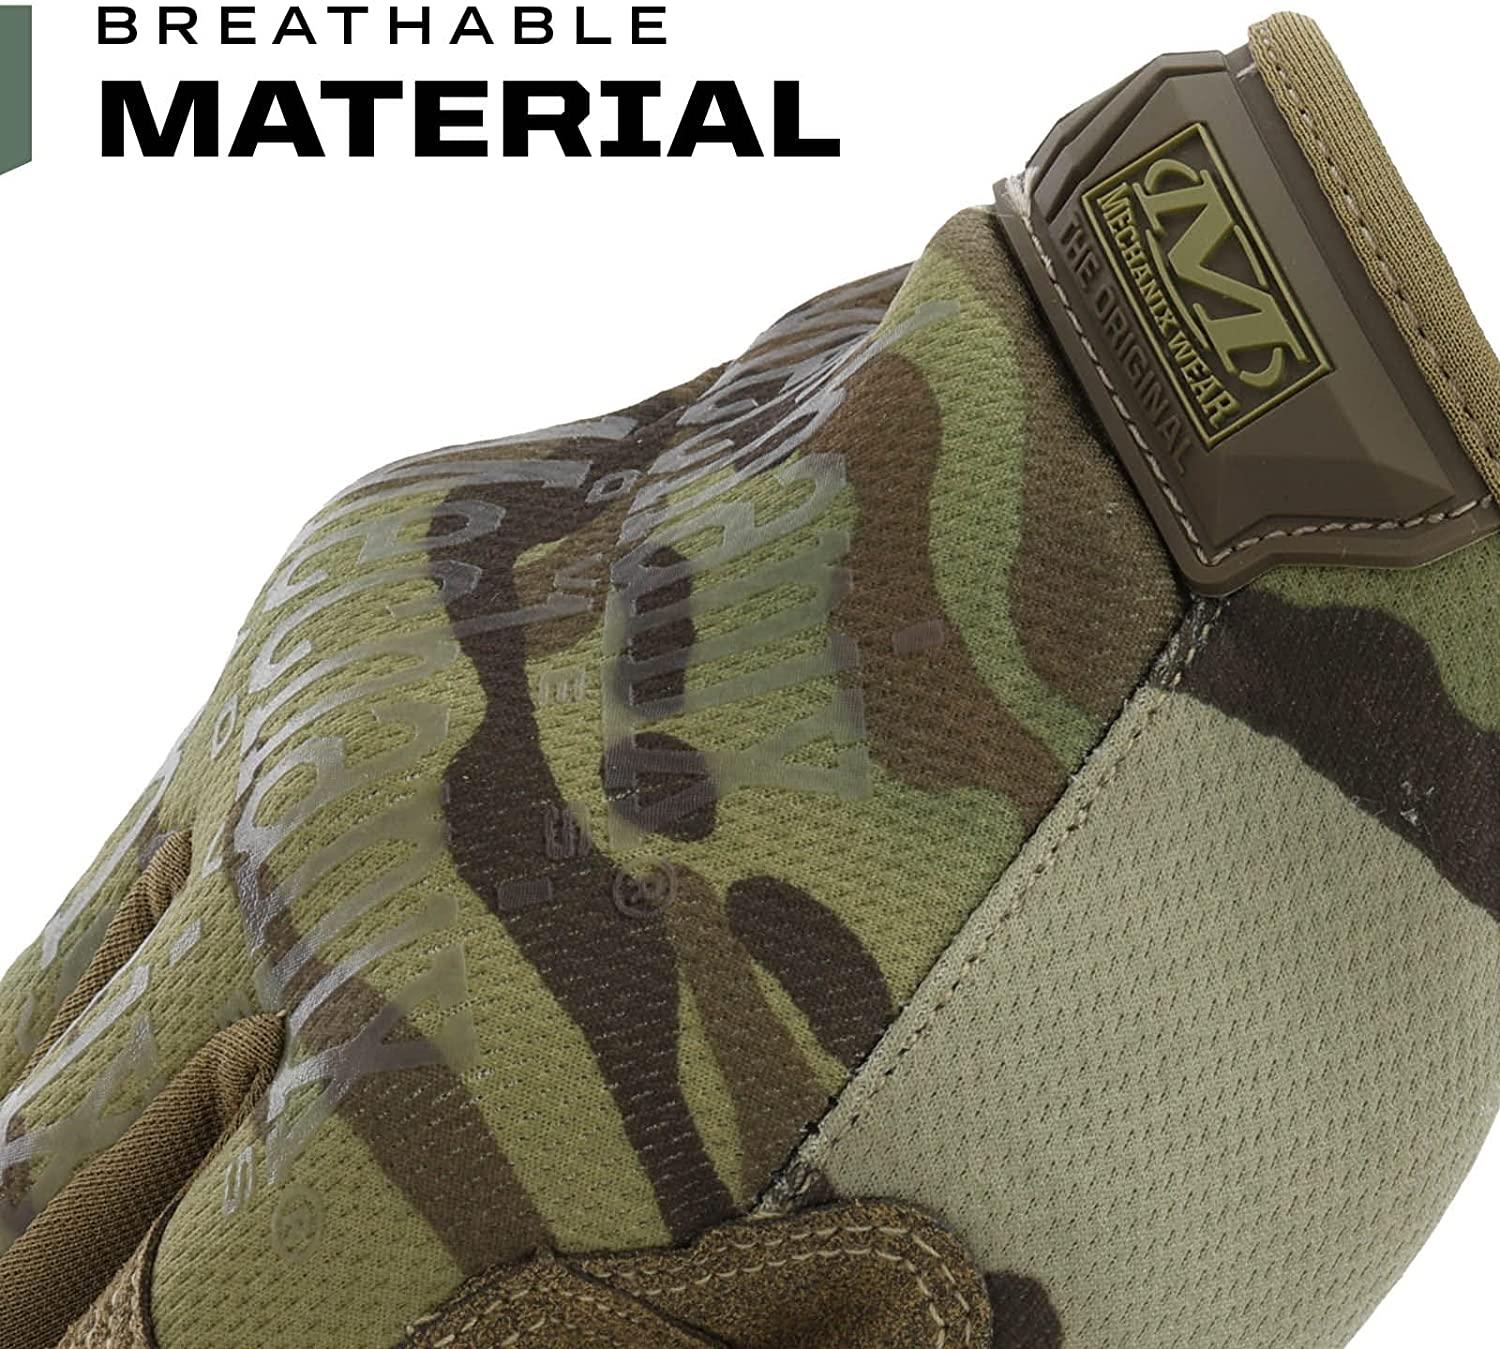 Mechanix Wear: The Original Tactical Work Gloves with Secure Fit, Flexible  Grip for Multi-Purpose Use, Durable Touchscreen Safety Gloves for Men  (Camouflage - MultiCam, X-Large) 2 Count (Pack of 1) Camouflage - Multicam